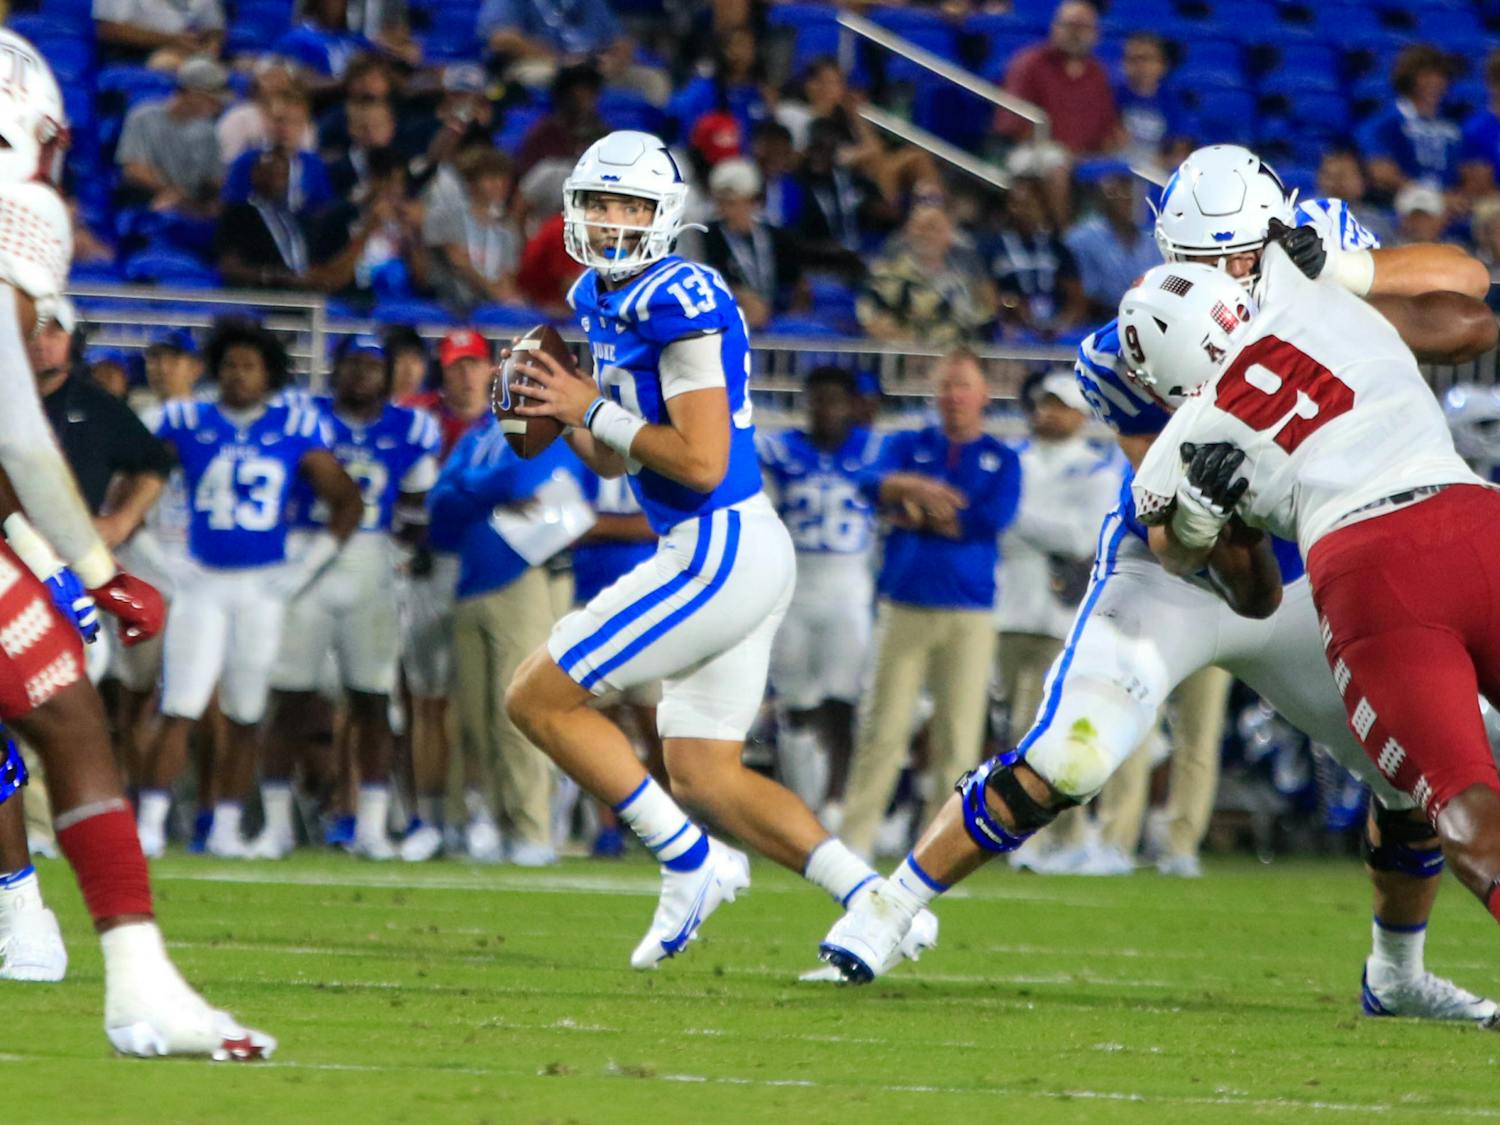 Riley Leonard and the Duke offense face their first conference opponent Saturday night. 